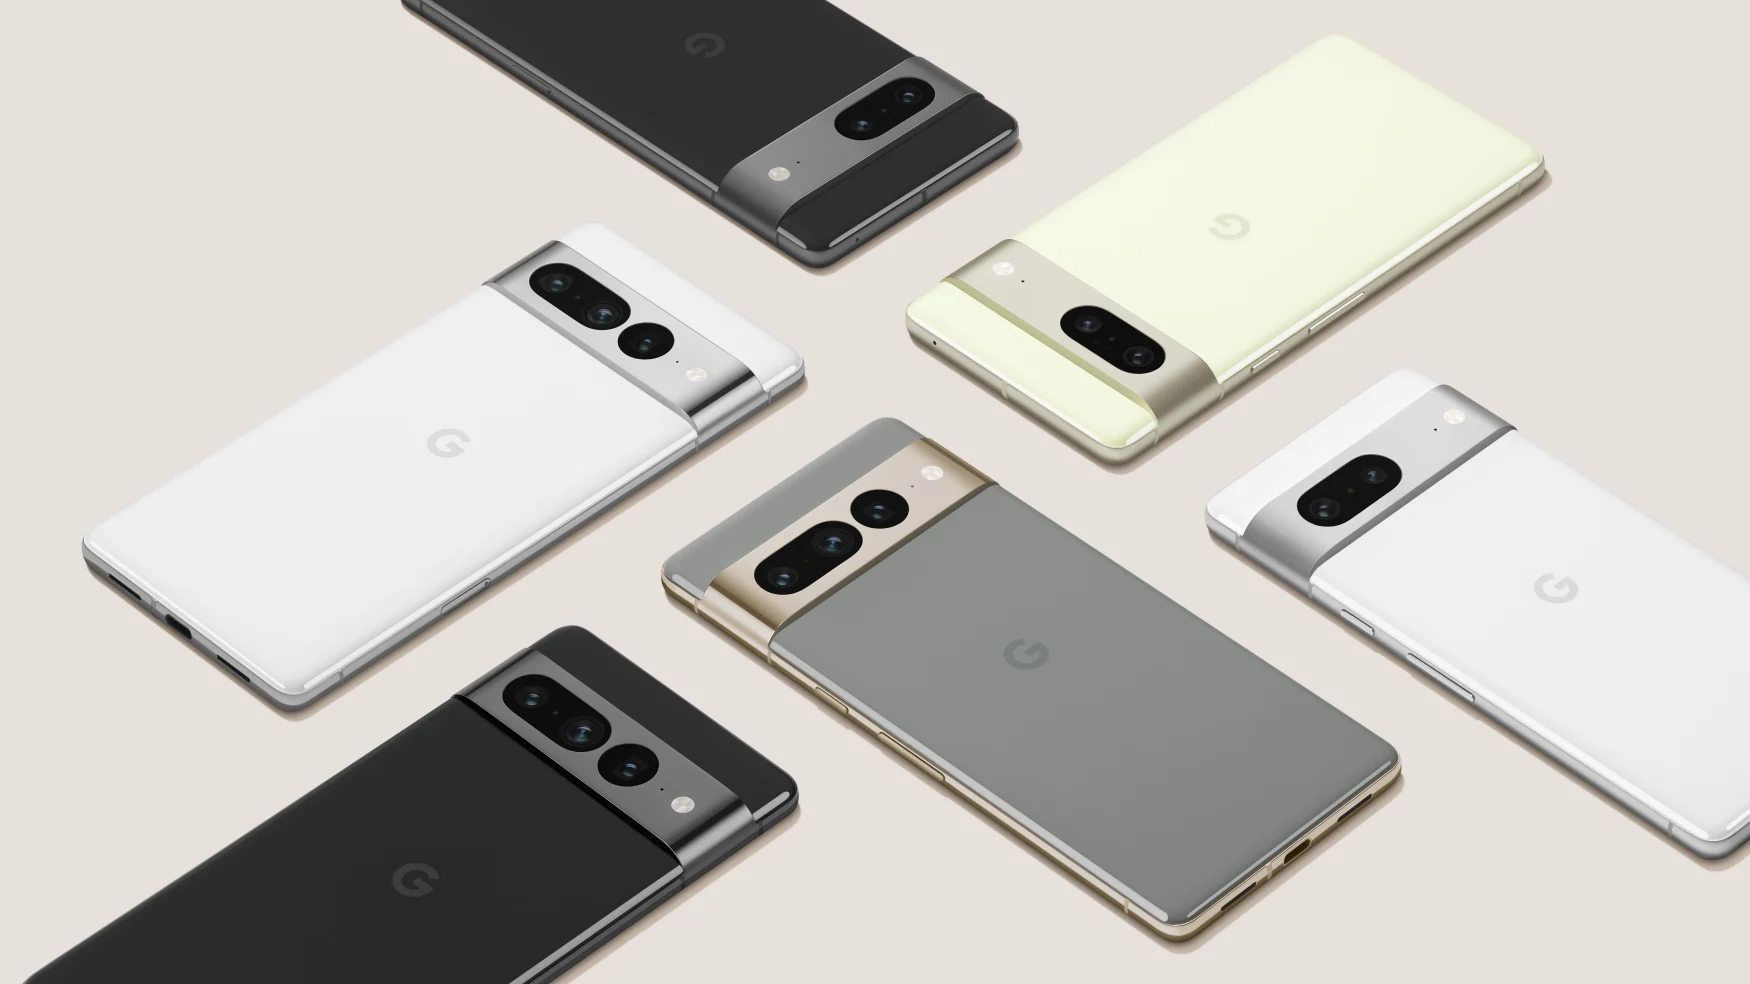 While the Pixel 7 features a similar design to last year's phone, it's getting a new chassis made from recycled aluminum along with a refreshed camera system. 